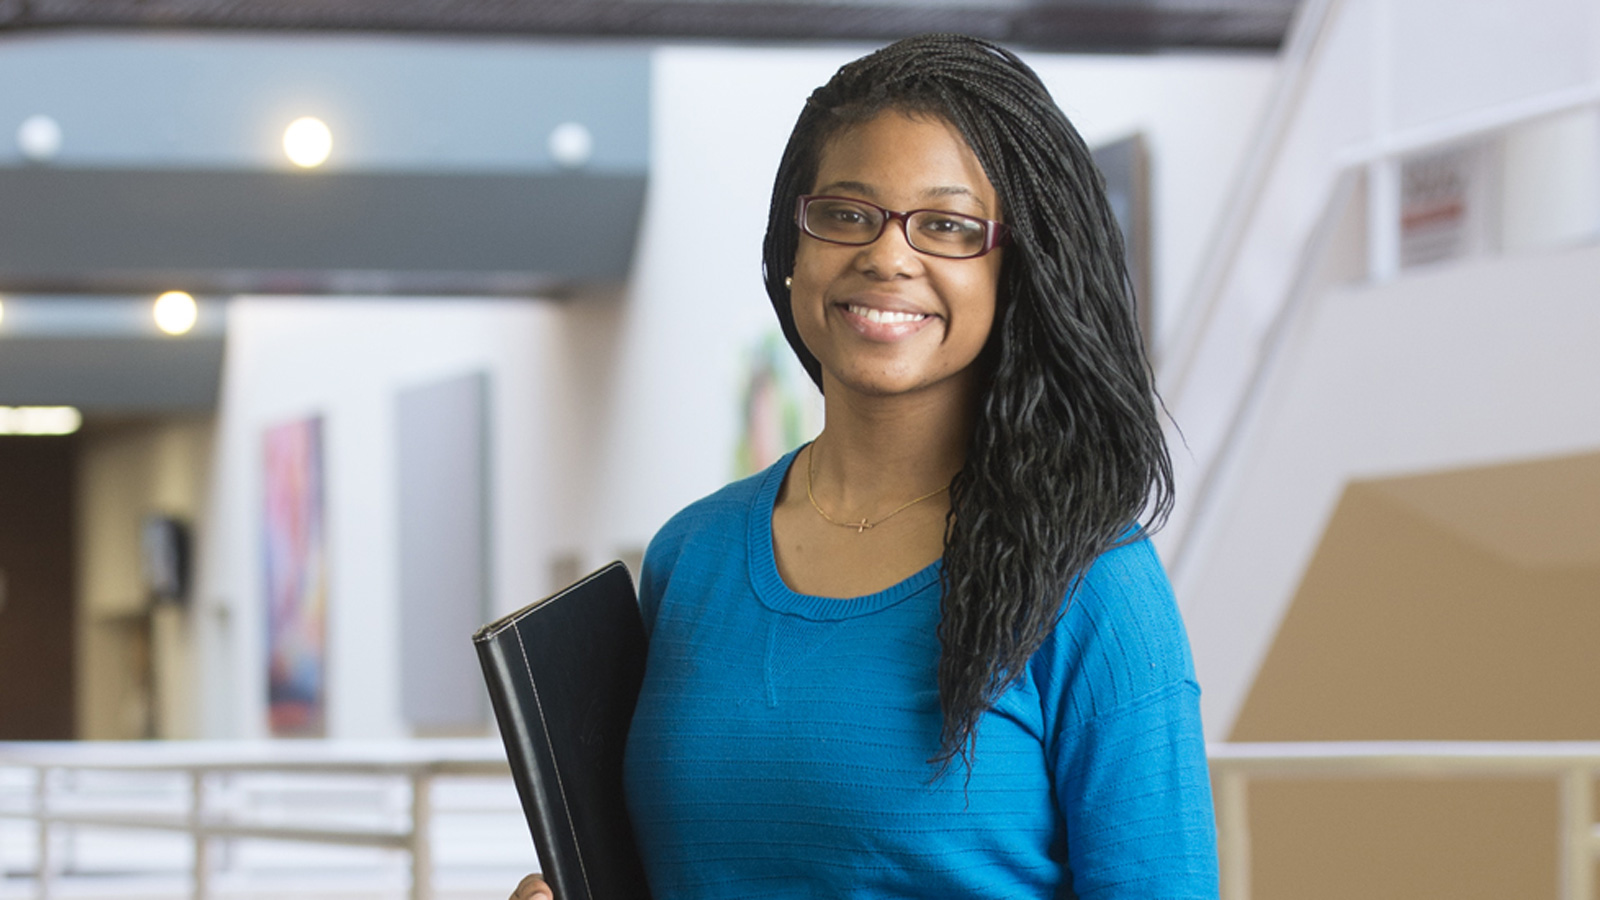 female business student smiling at camera